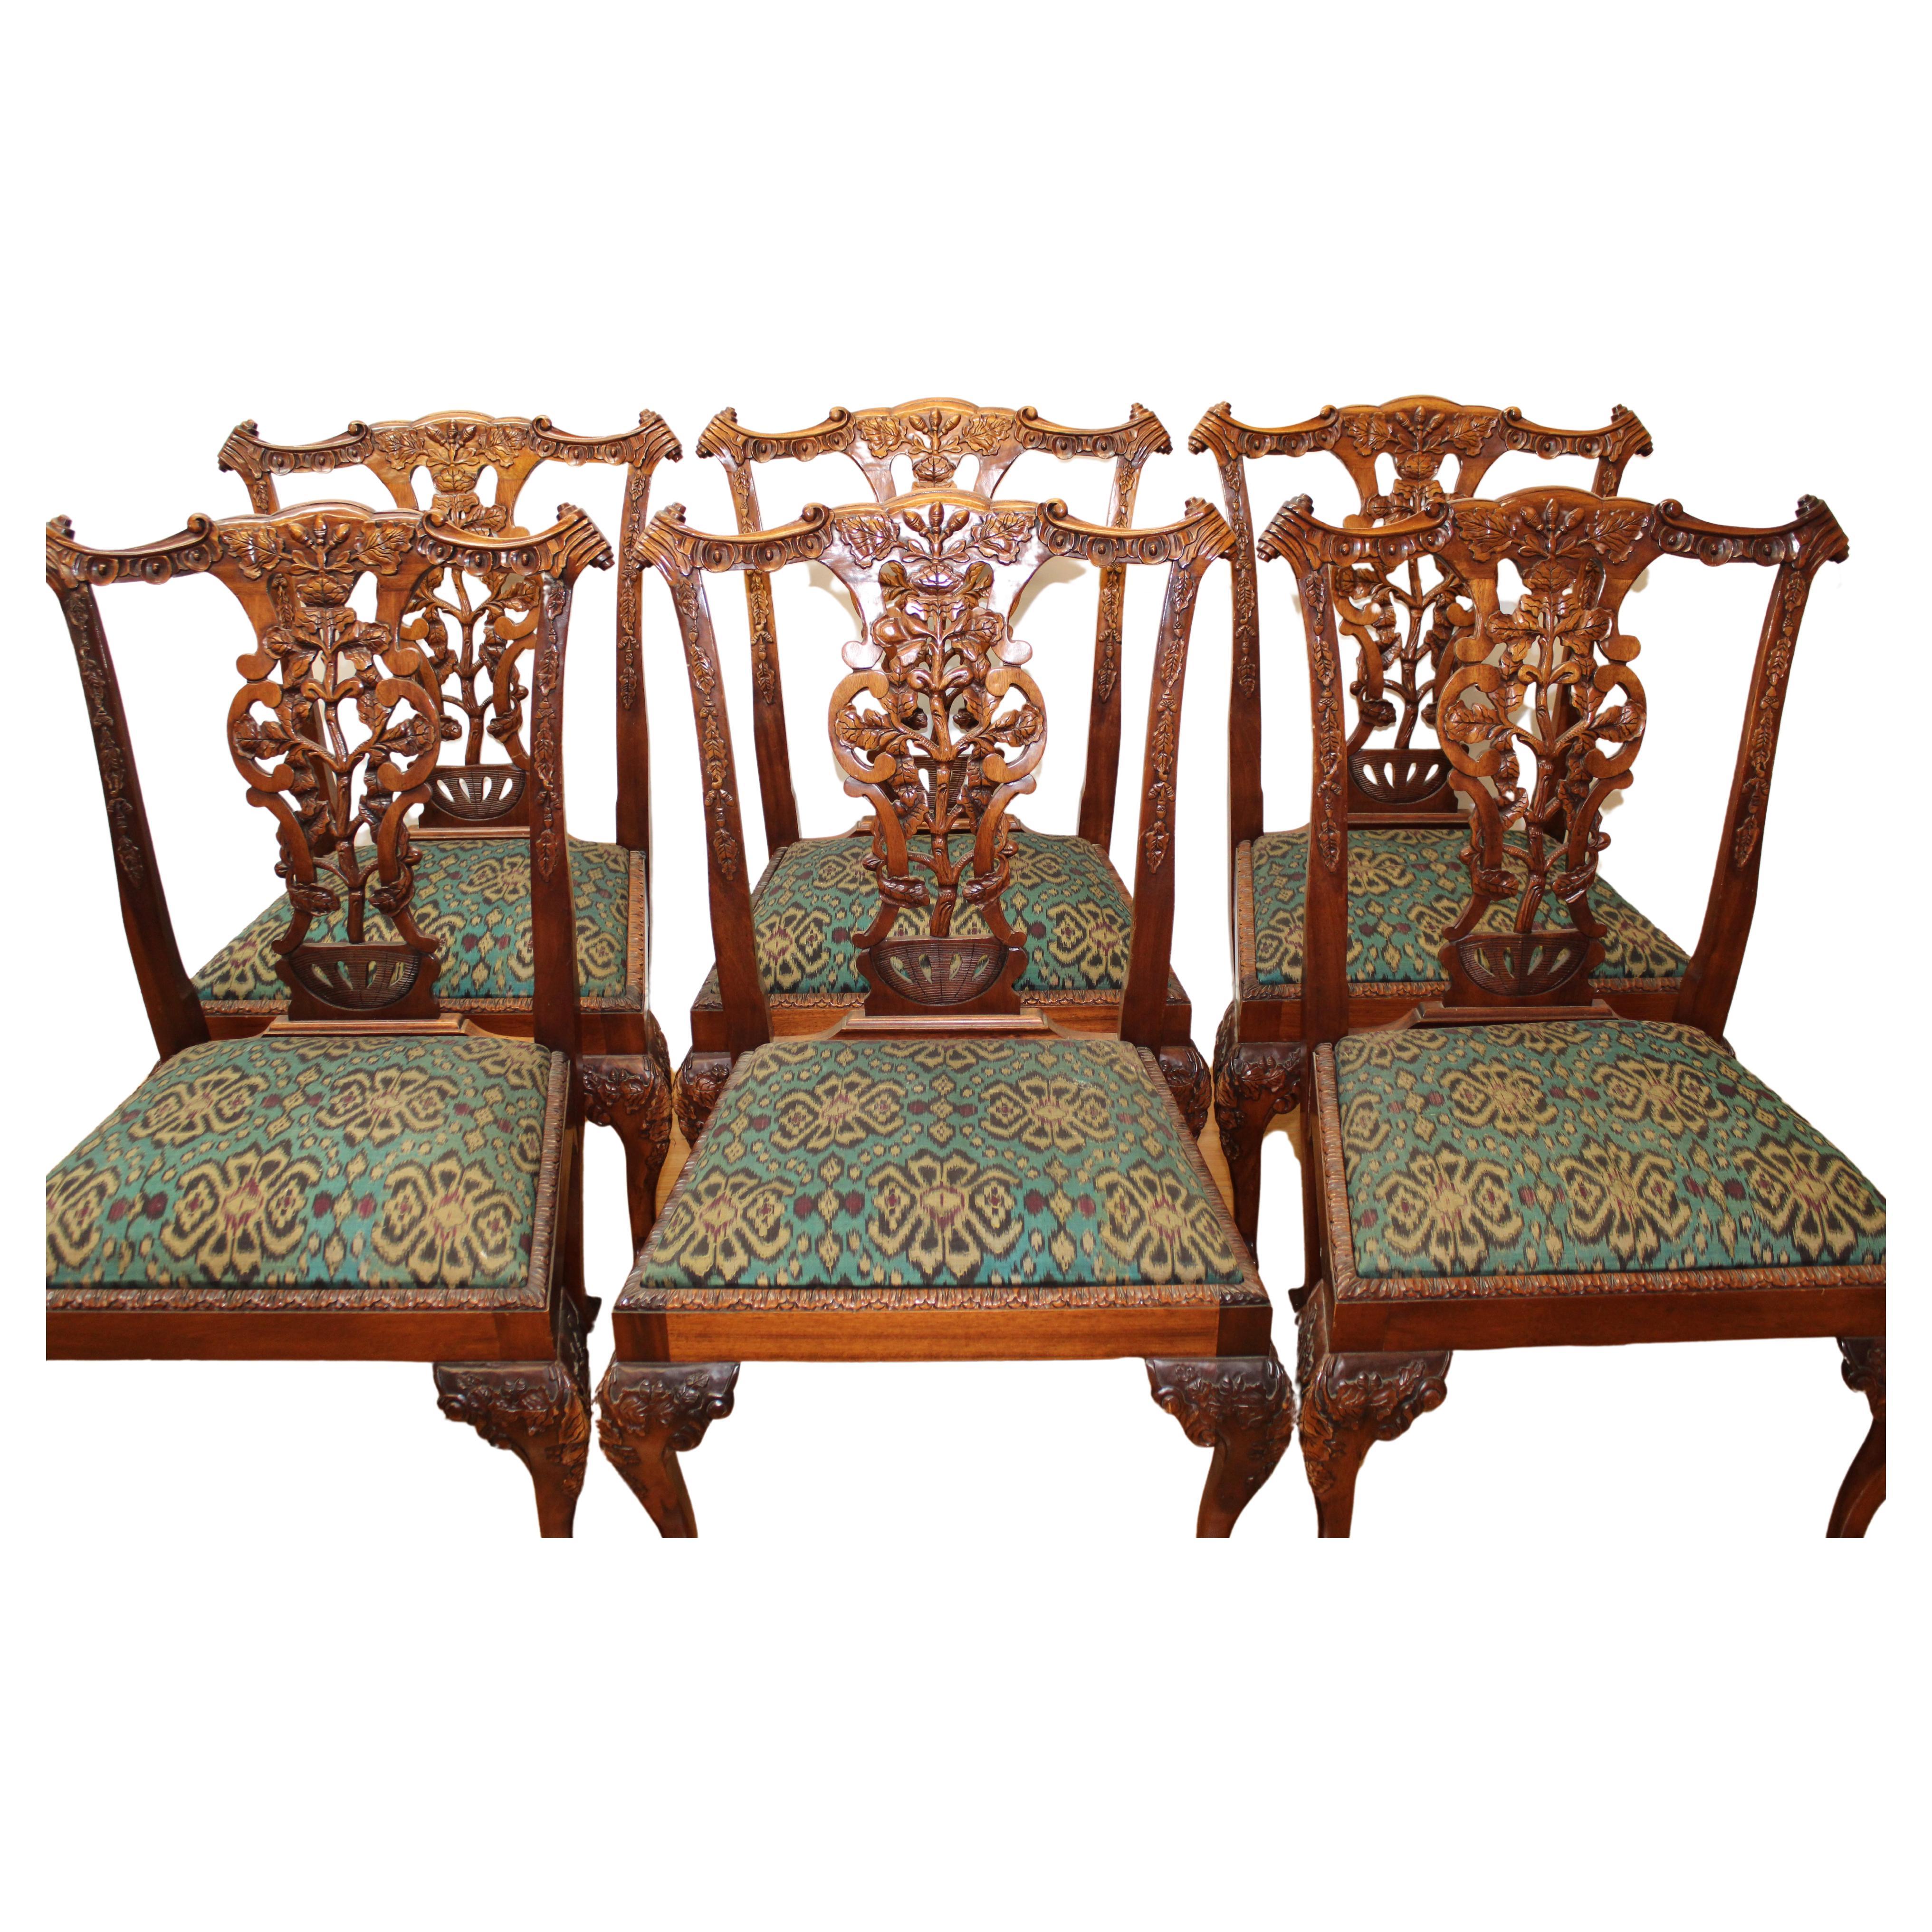 C. early 20th century

Set of 6 Chippendale style side chairs, ornately carved wood w/ acorn & leaf design w/ ball & claw feet.